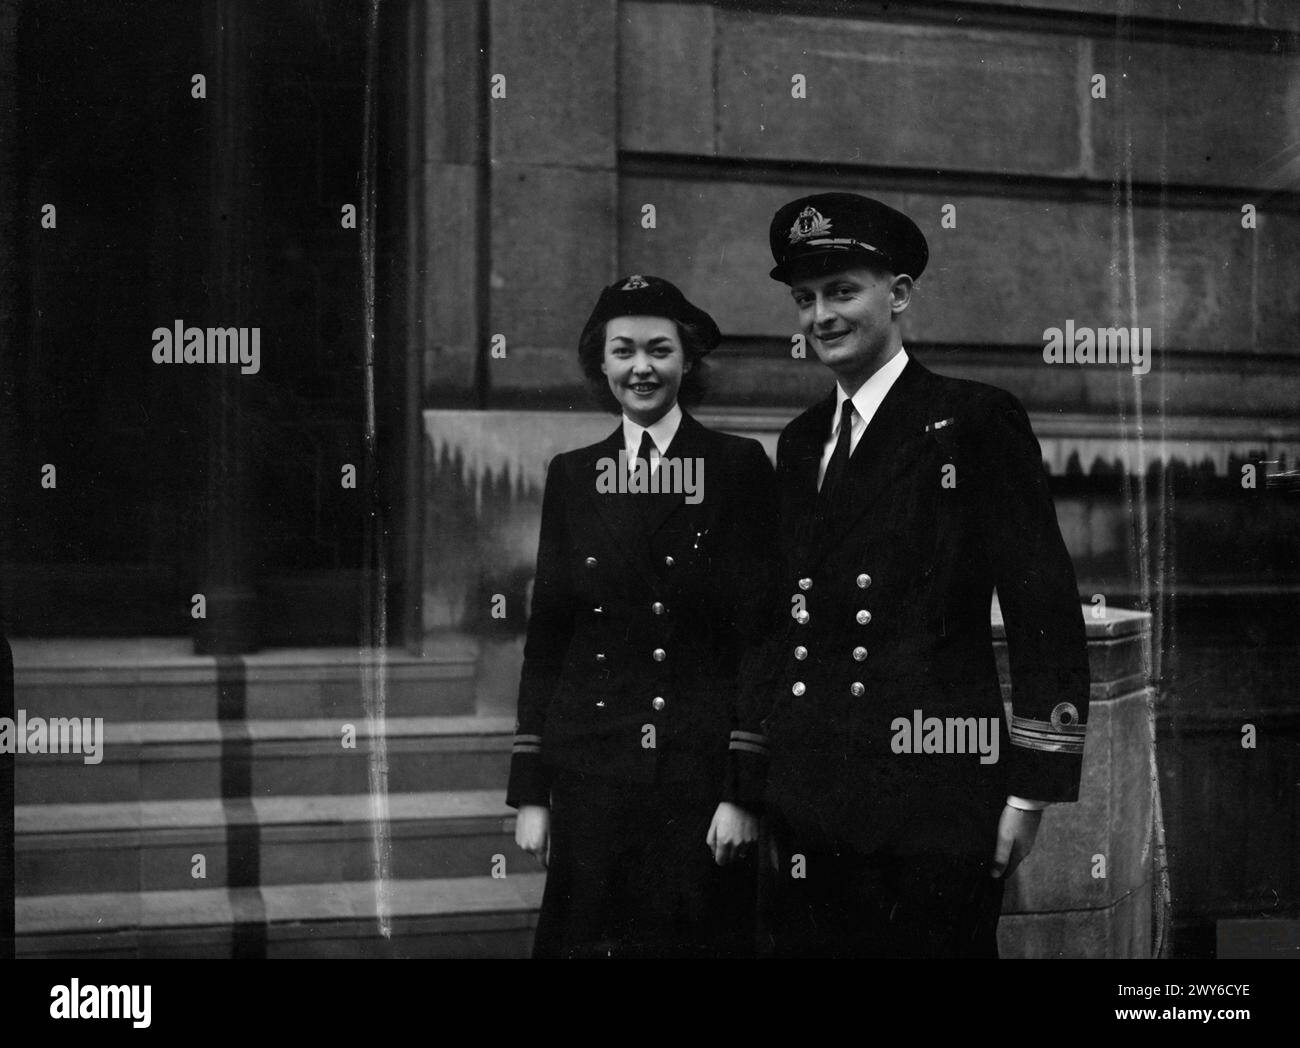 A NAVAL ENGAGEMENT. 29 JUNE 1945, DERBY HOUSE, LIVERPOOL. THE ENGAGEMENT BETWEEN LIEUTENANT COMMANDER DENIS JERMAIN, DSC, RN, OF FAREHAM, HANTS, AND 2ND OFFICER WRNS JEAN SCOTT-PHILLIPS, OF LARGS, AYRSHIRE. - Lieutenant Commander D Jermain, DSC, RN, and his fiancée. , Jermain, Denis, Scott-Phillips, Jean Eleanor Stock Photo